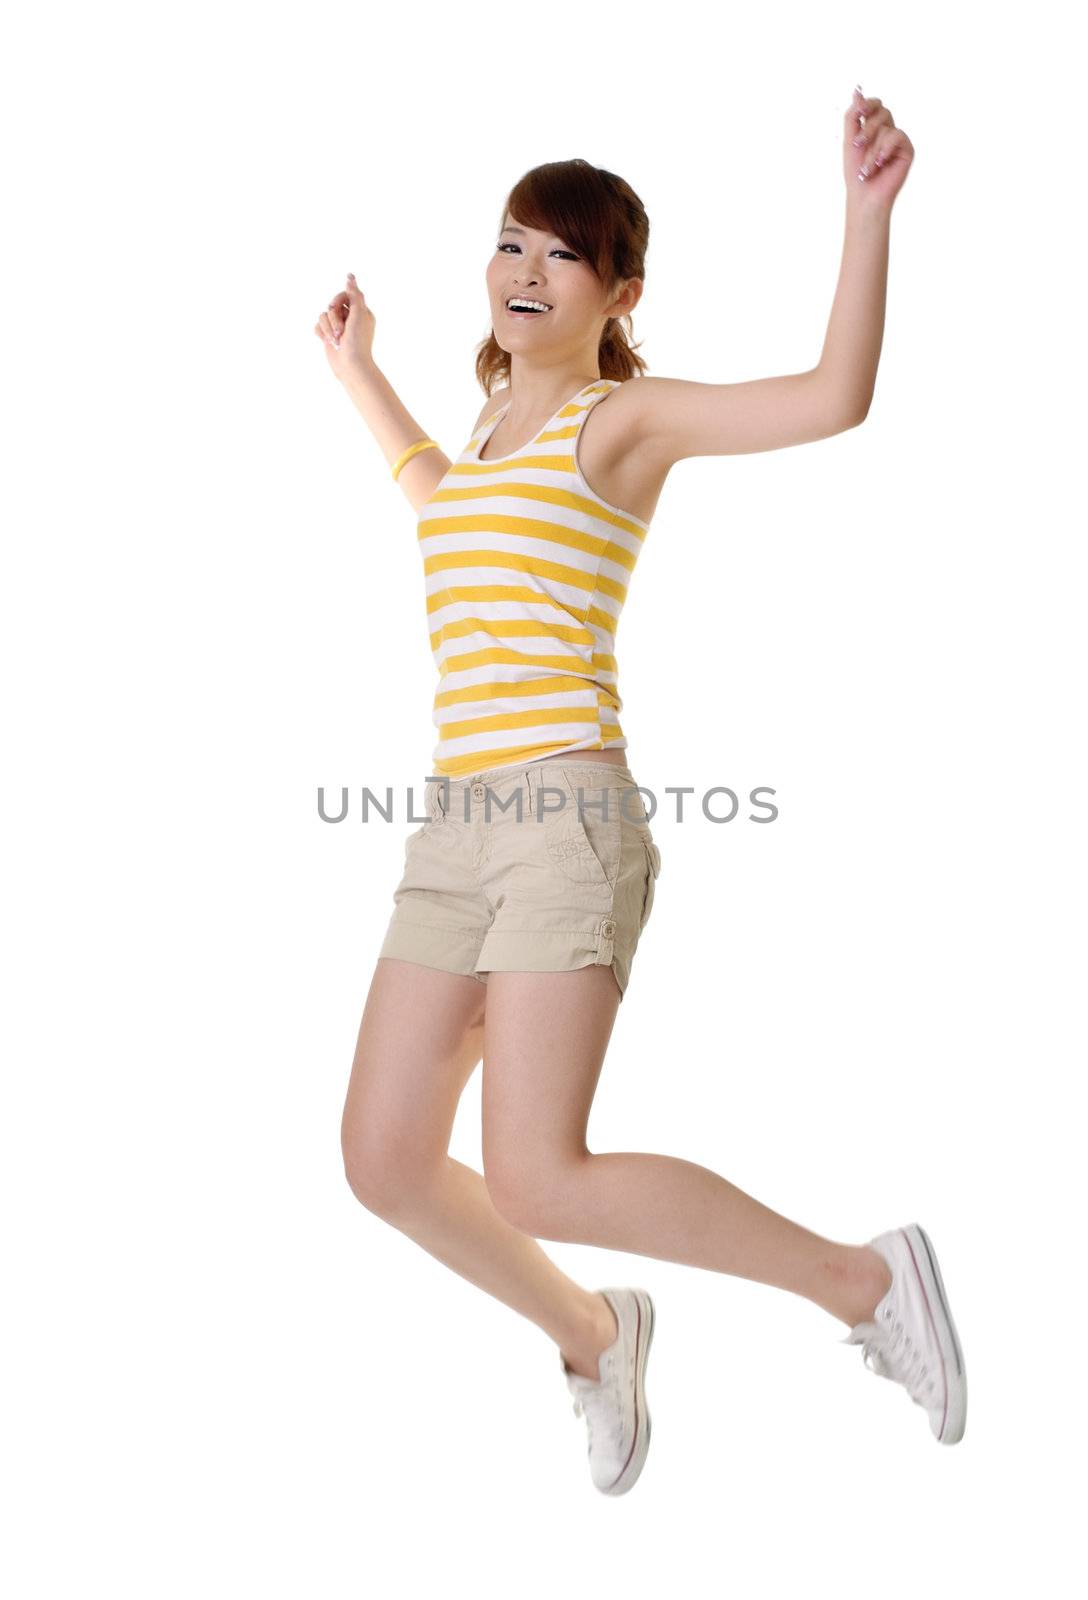 Happy girl jumping with smiling face isolated on white background.